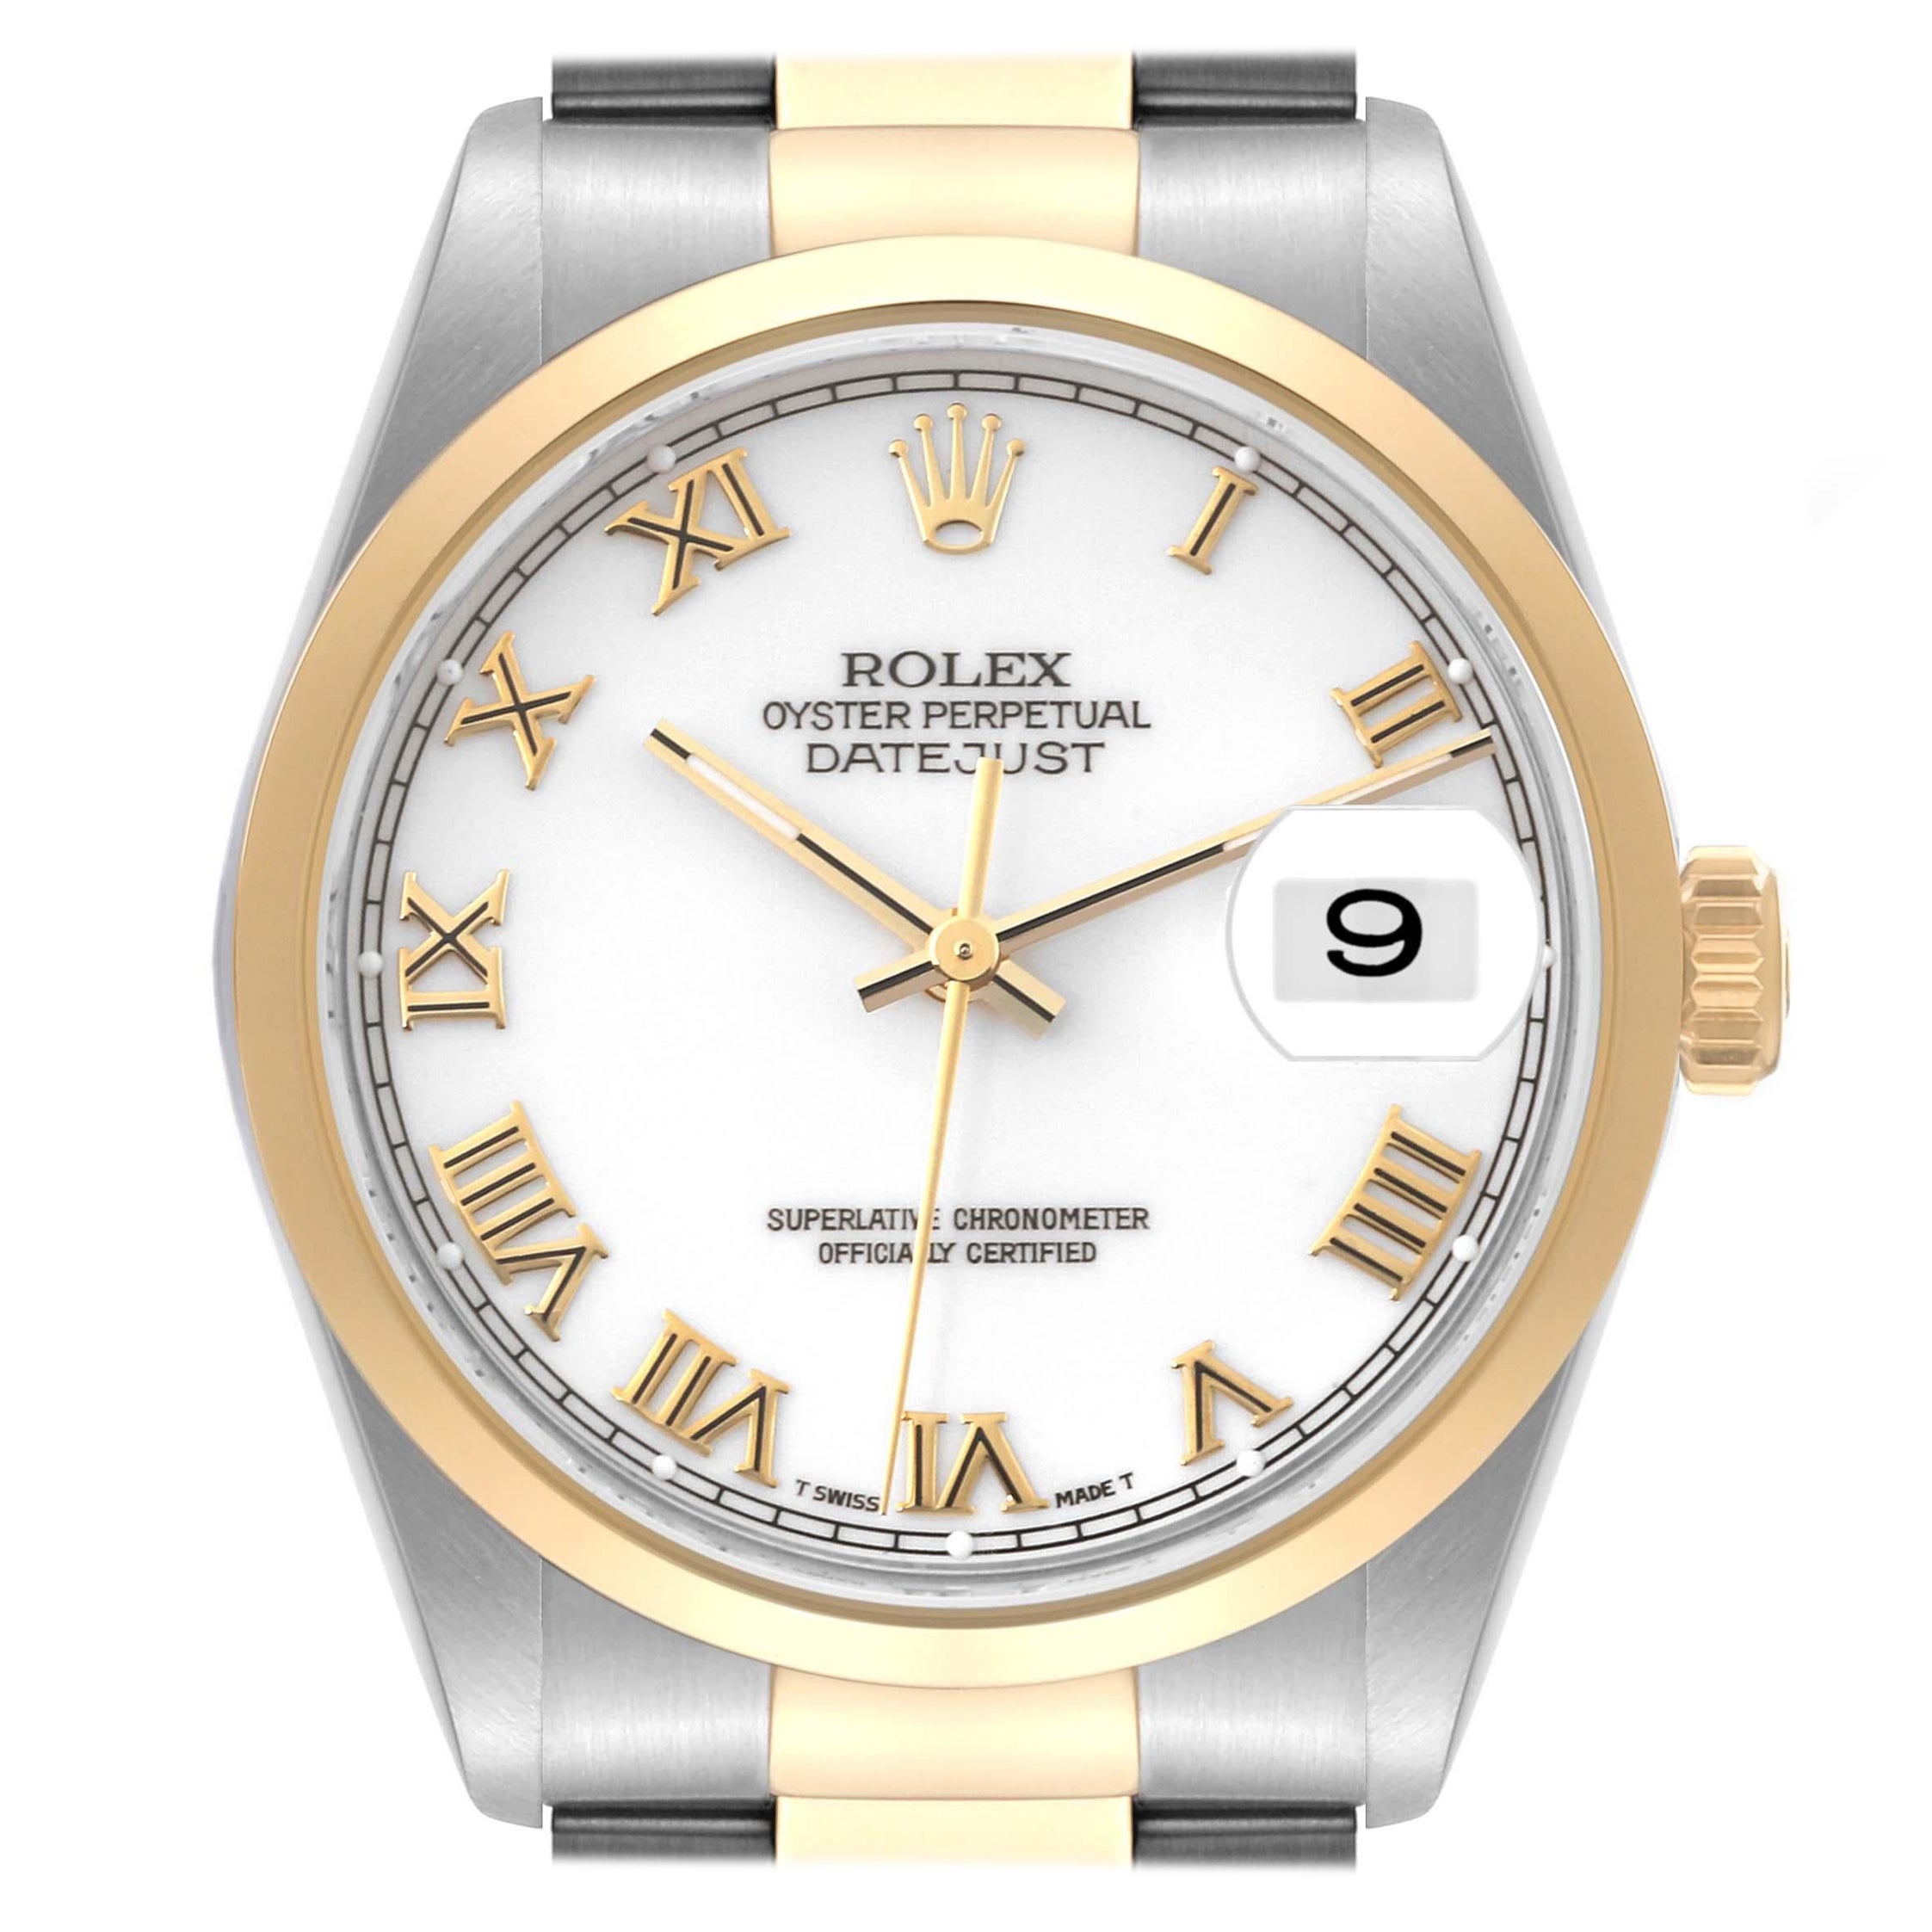 Rolex Datejust Steel Yellow Gold White Dial Mens Watch 16203 Box Papers For Sale